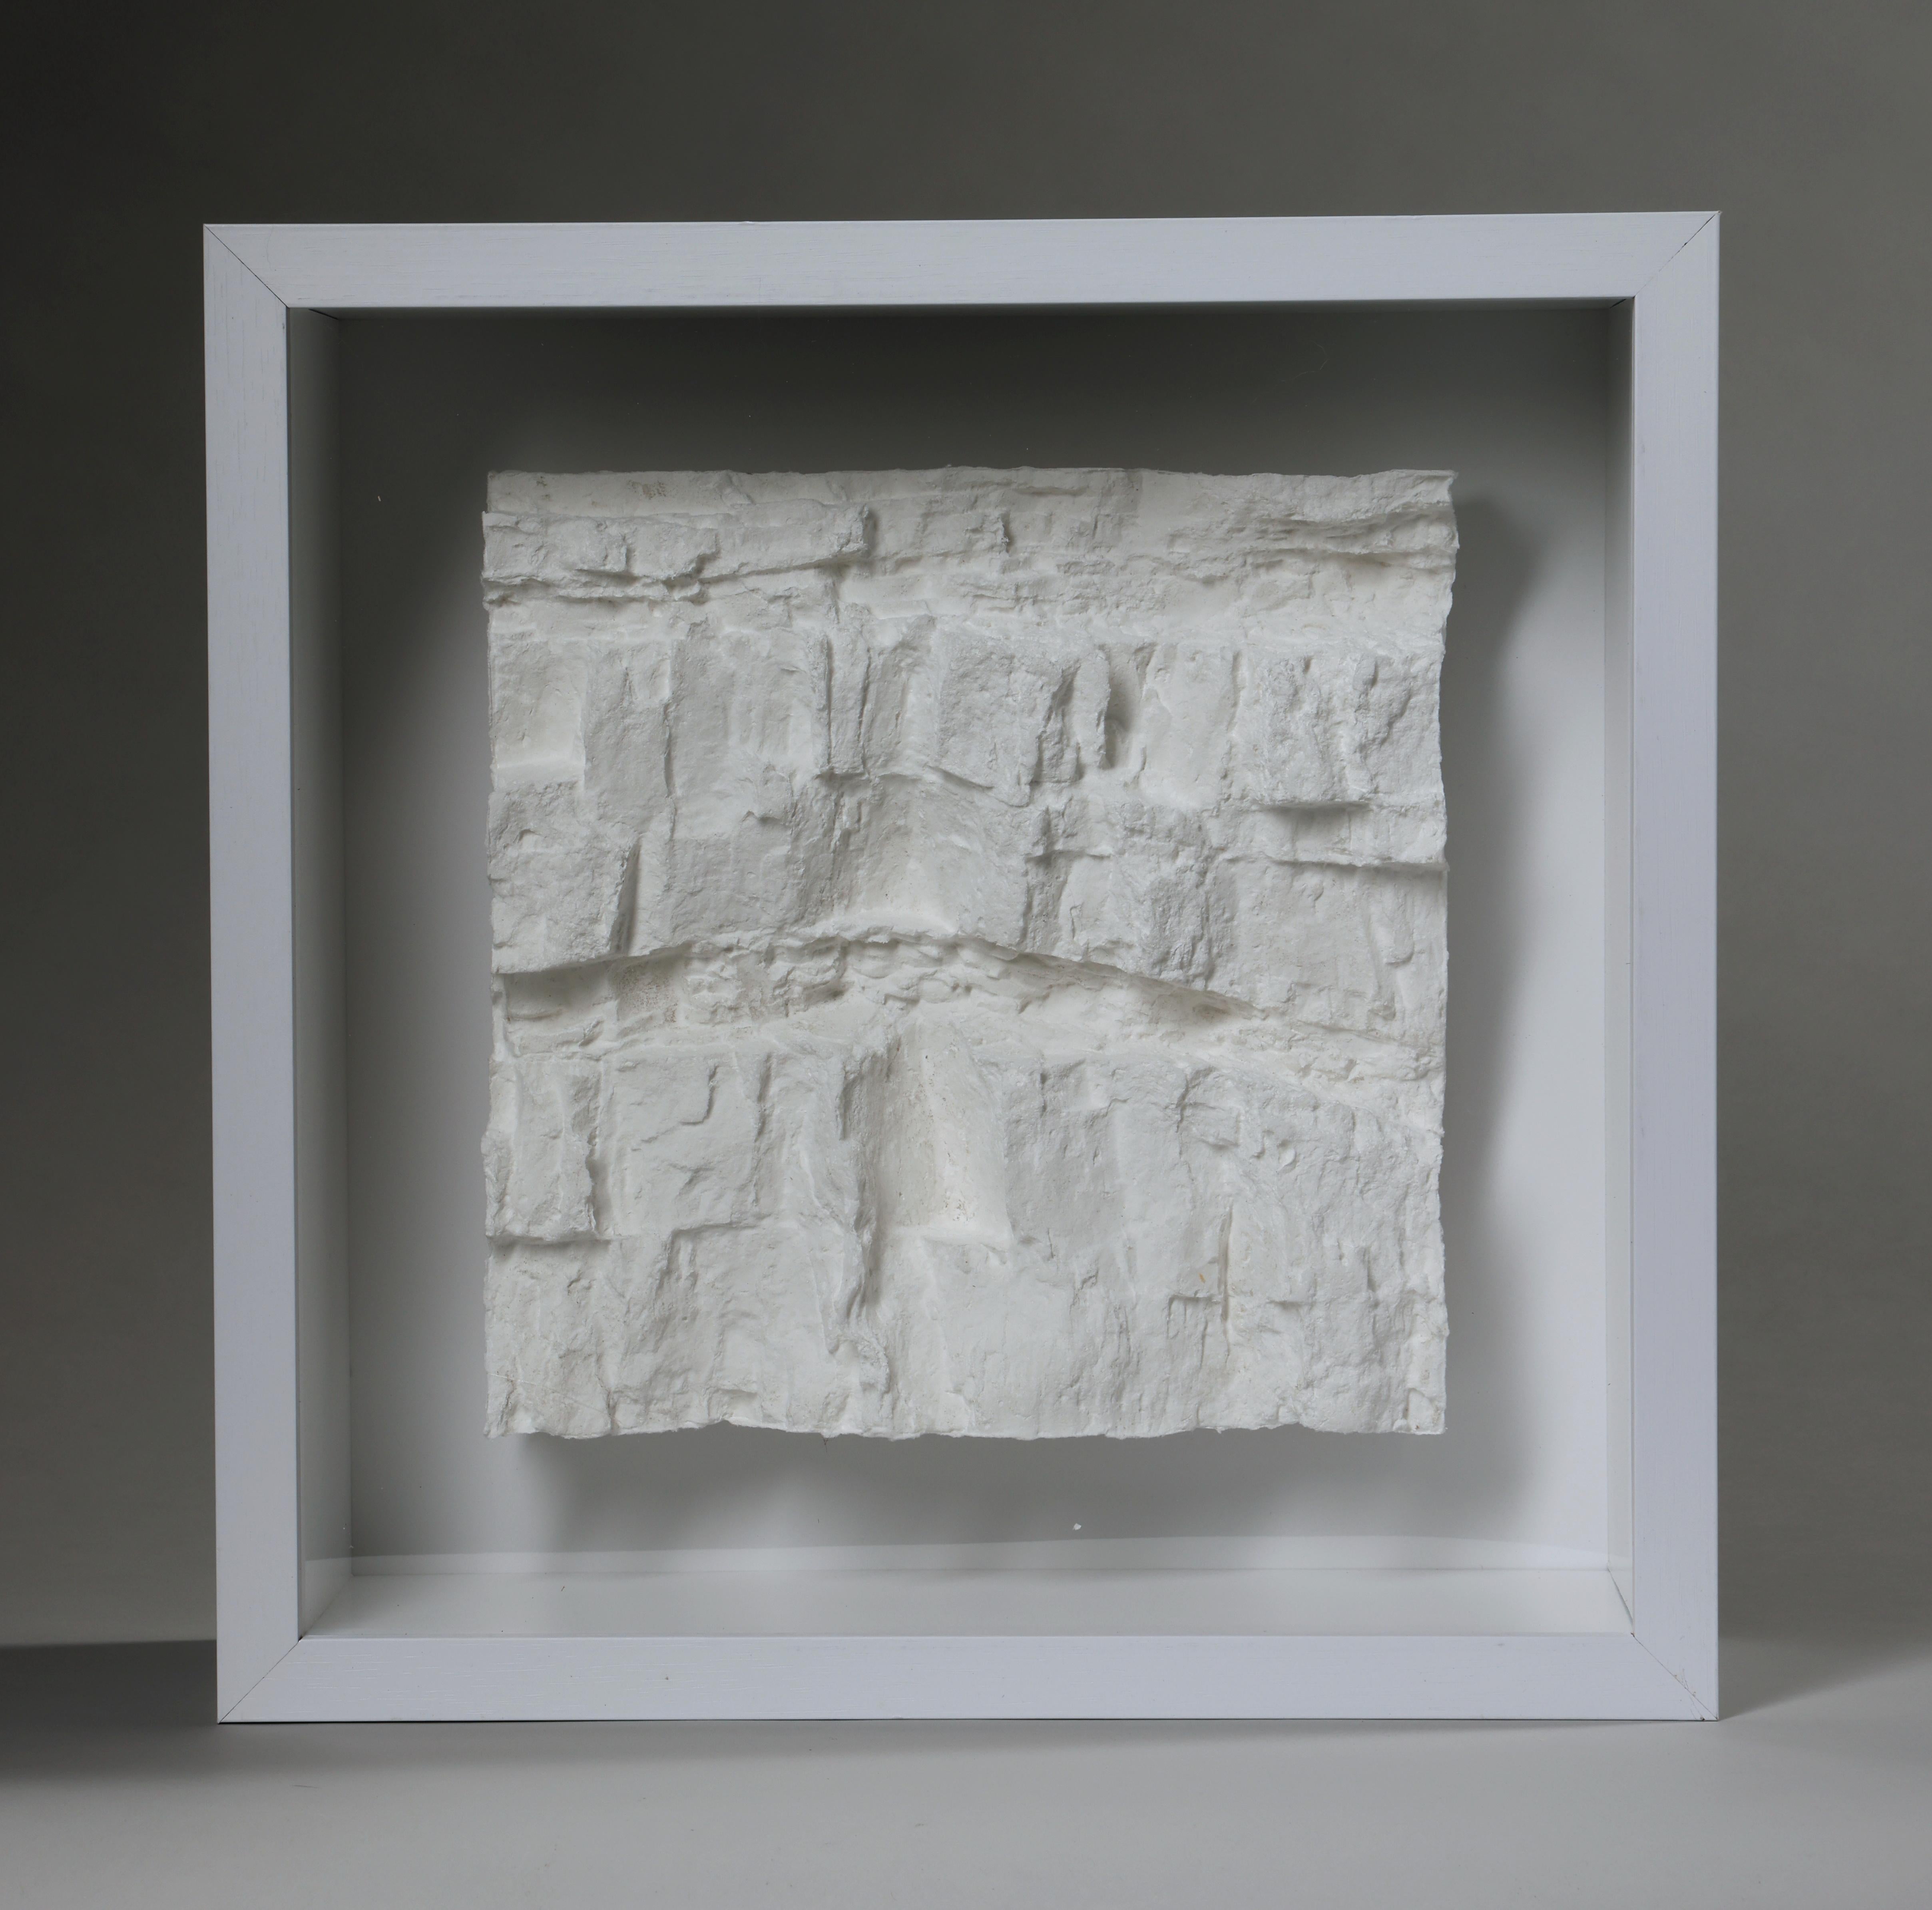 Please allow a two month turnaround time for this piece to be made. 

About Cast Paper In David's words:

“One thread running through my work is a connection to nature. Casting natural forms in glass has given me a way to be in dialogue with nature